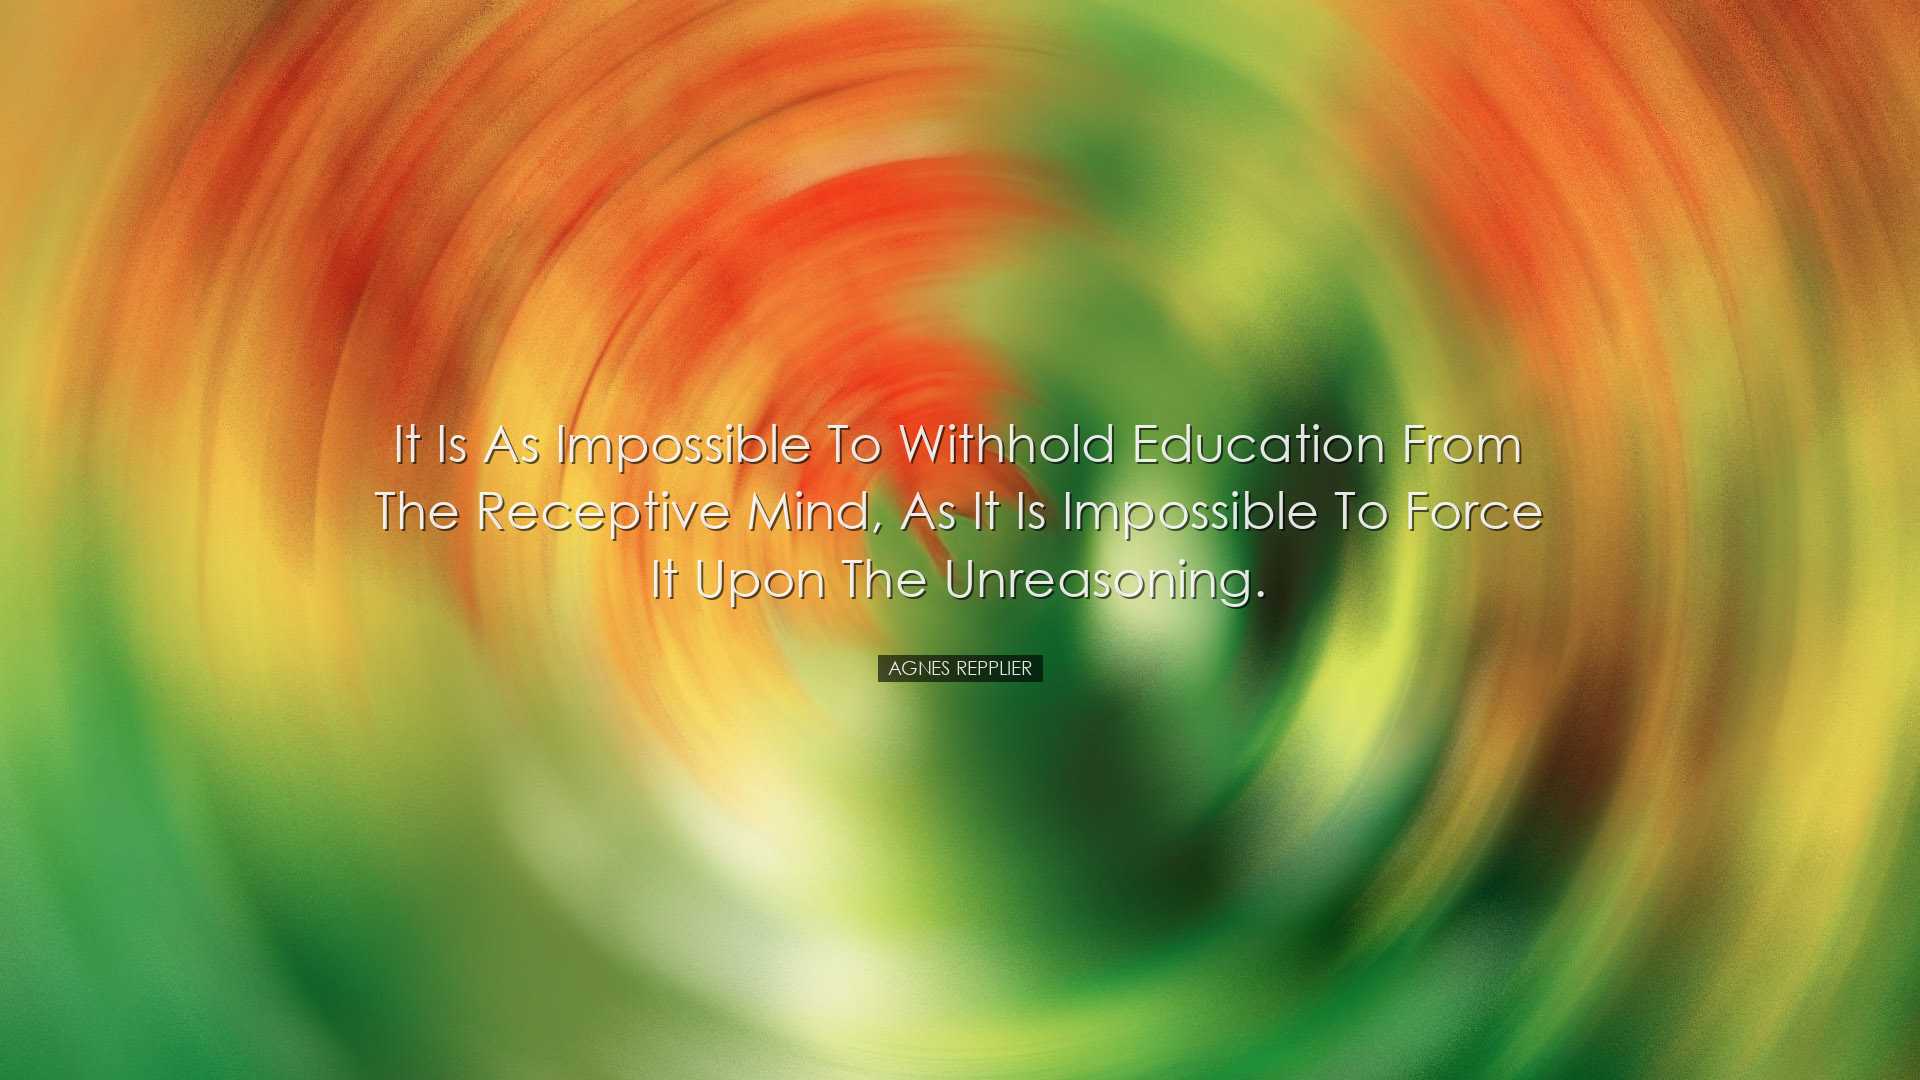 It is as impossible to withhold education from the receptive mind,